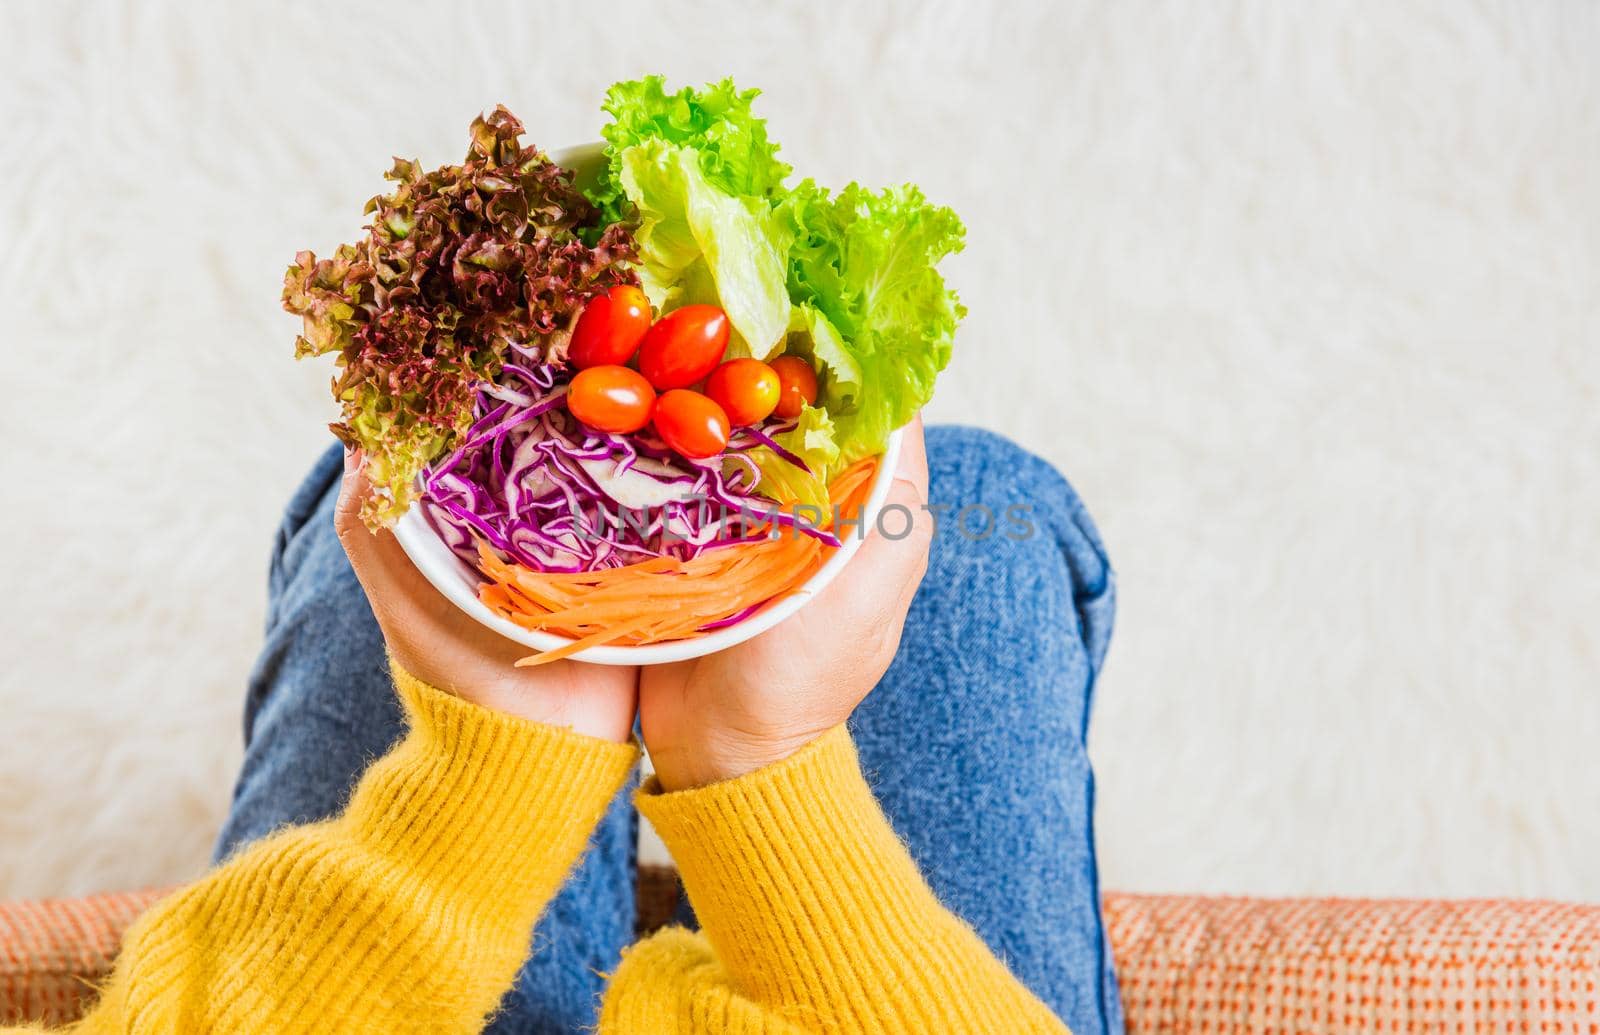 Top view of female hands holding bowl with green lettuce salad on legs, a young woman eating fresh salad meal vegetarian spinach in a bowl, Clean detox healthy food concept